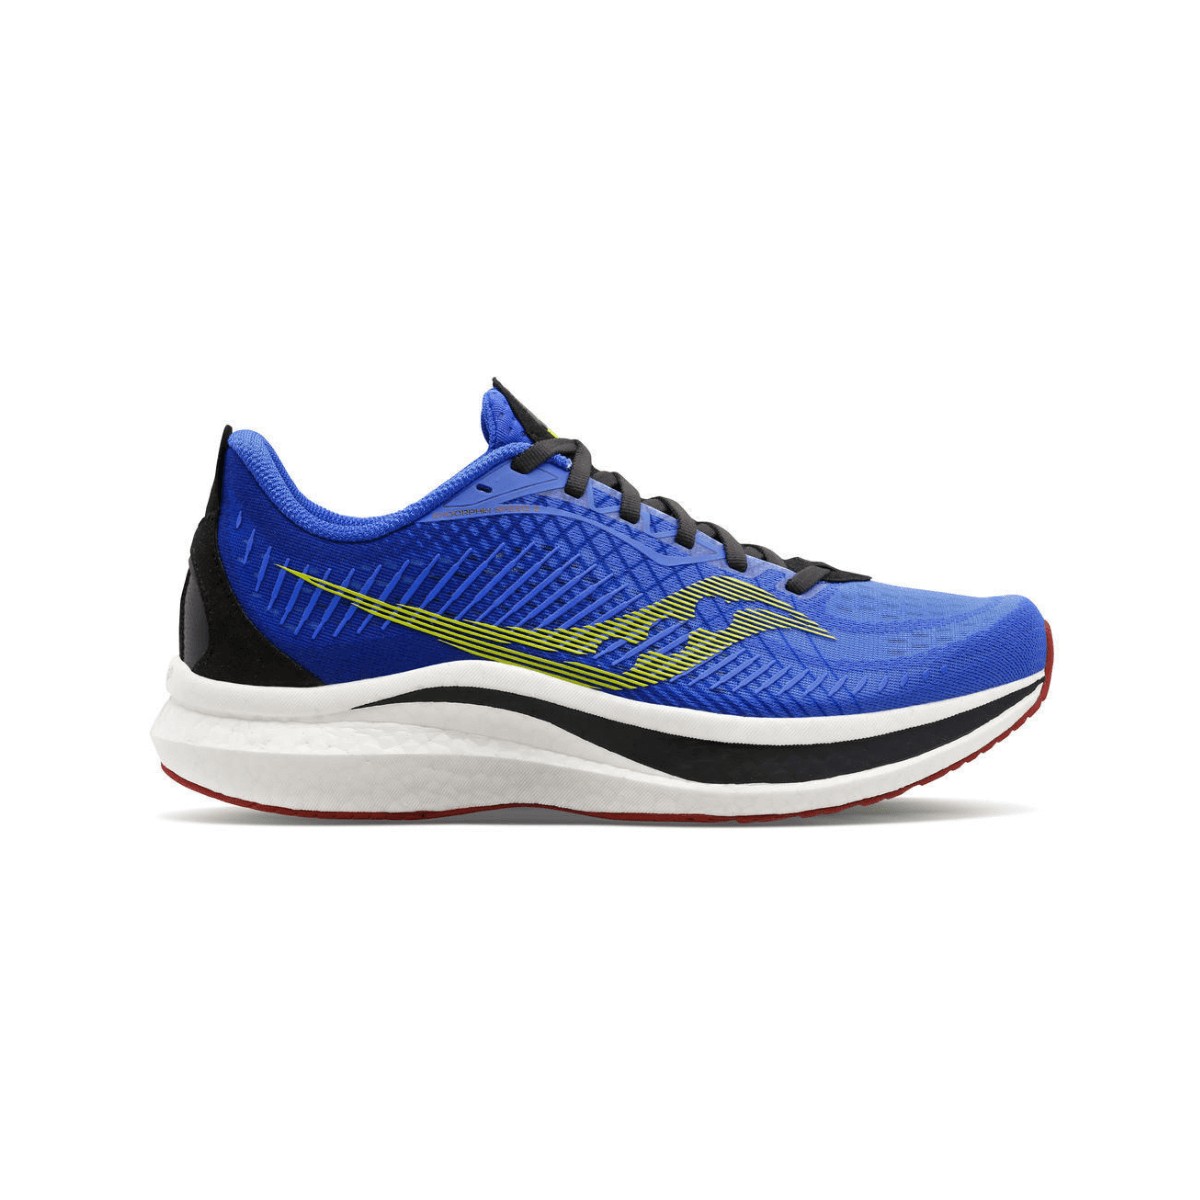 Saucony Endorphin Speed 2 Shoes Blue Lime SS22, Size 44 - EUR